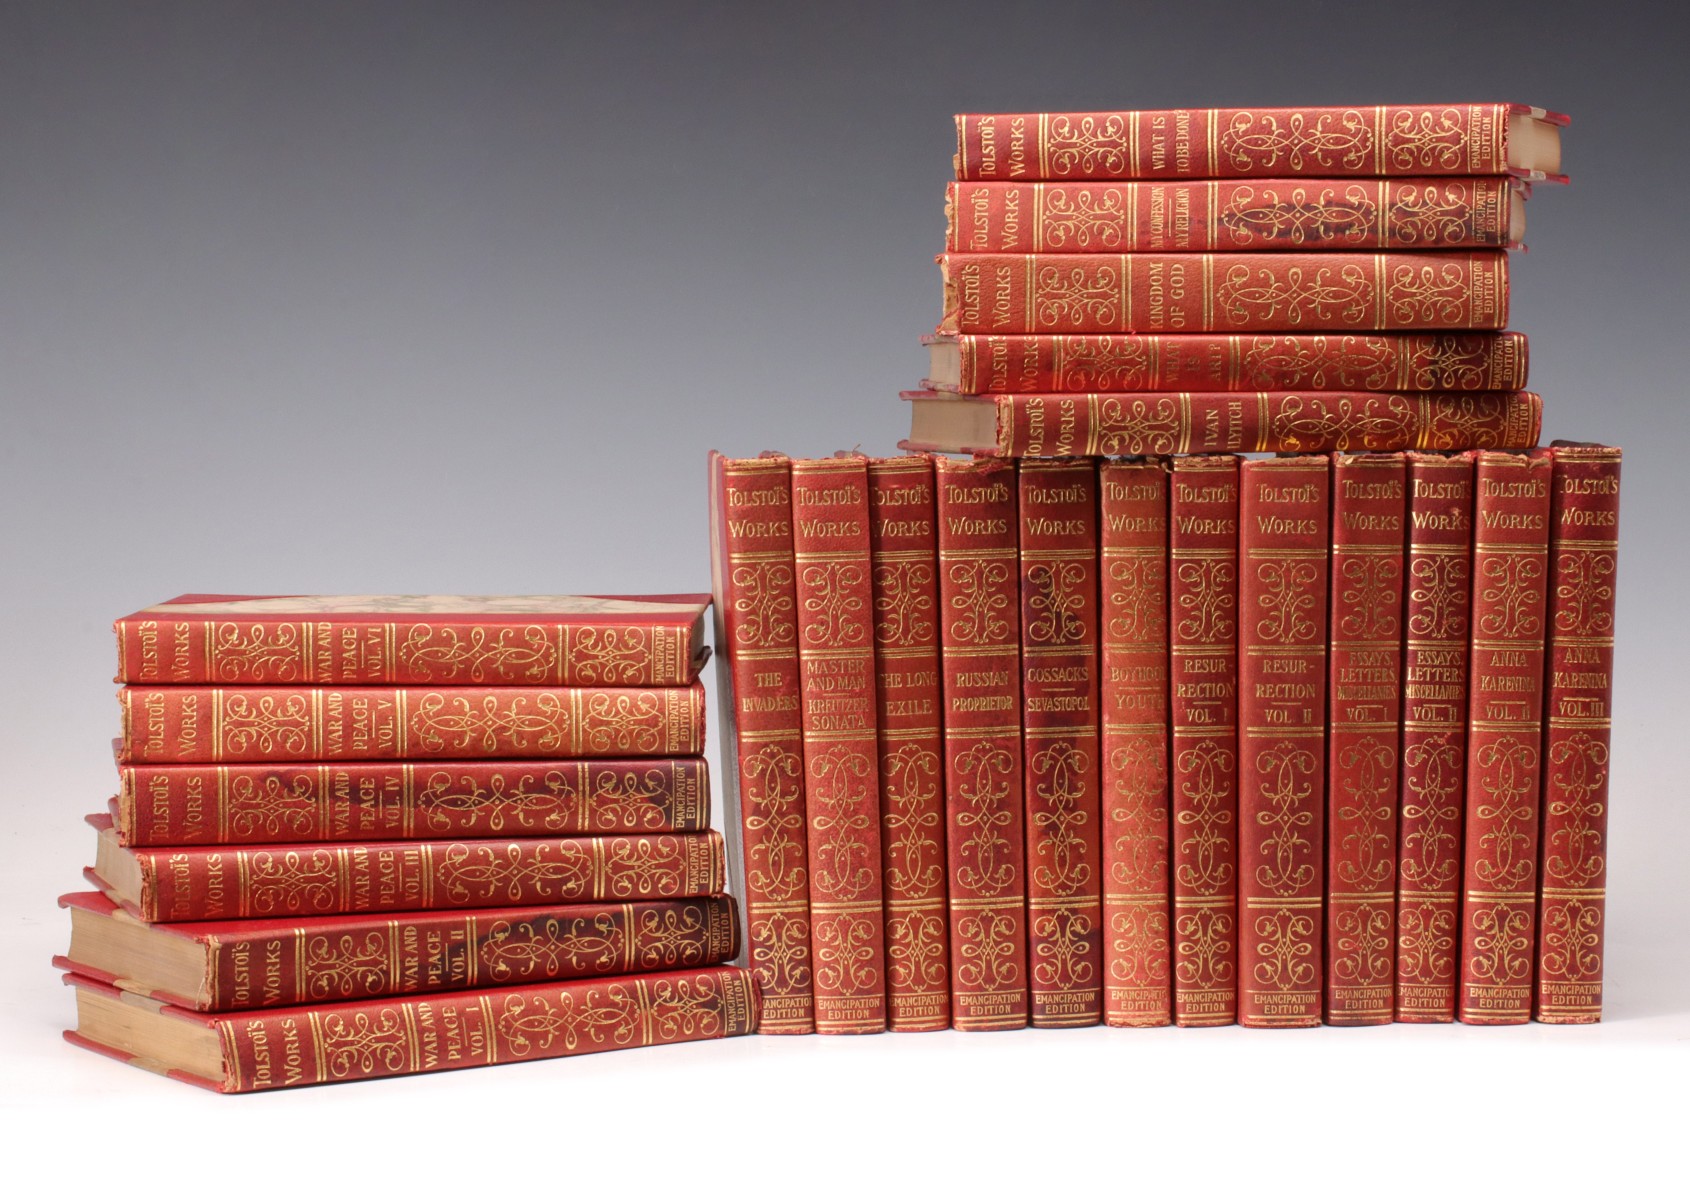 THE COMPLETE WORKS OF TOLSTOY IN RED LEATHER